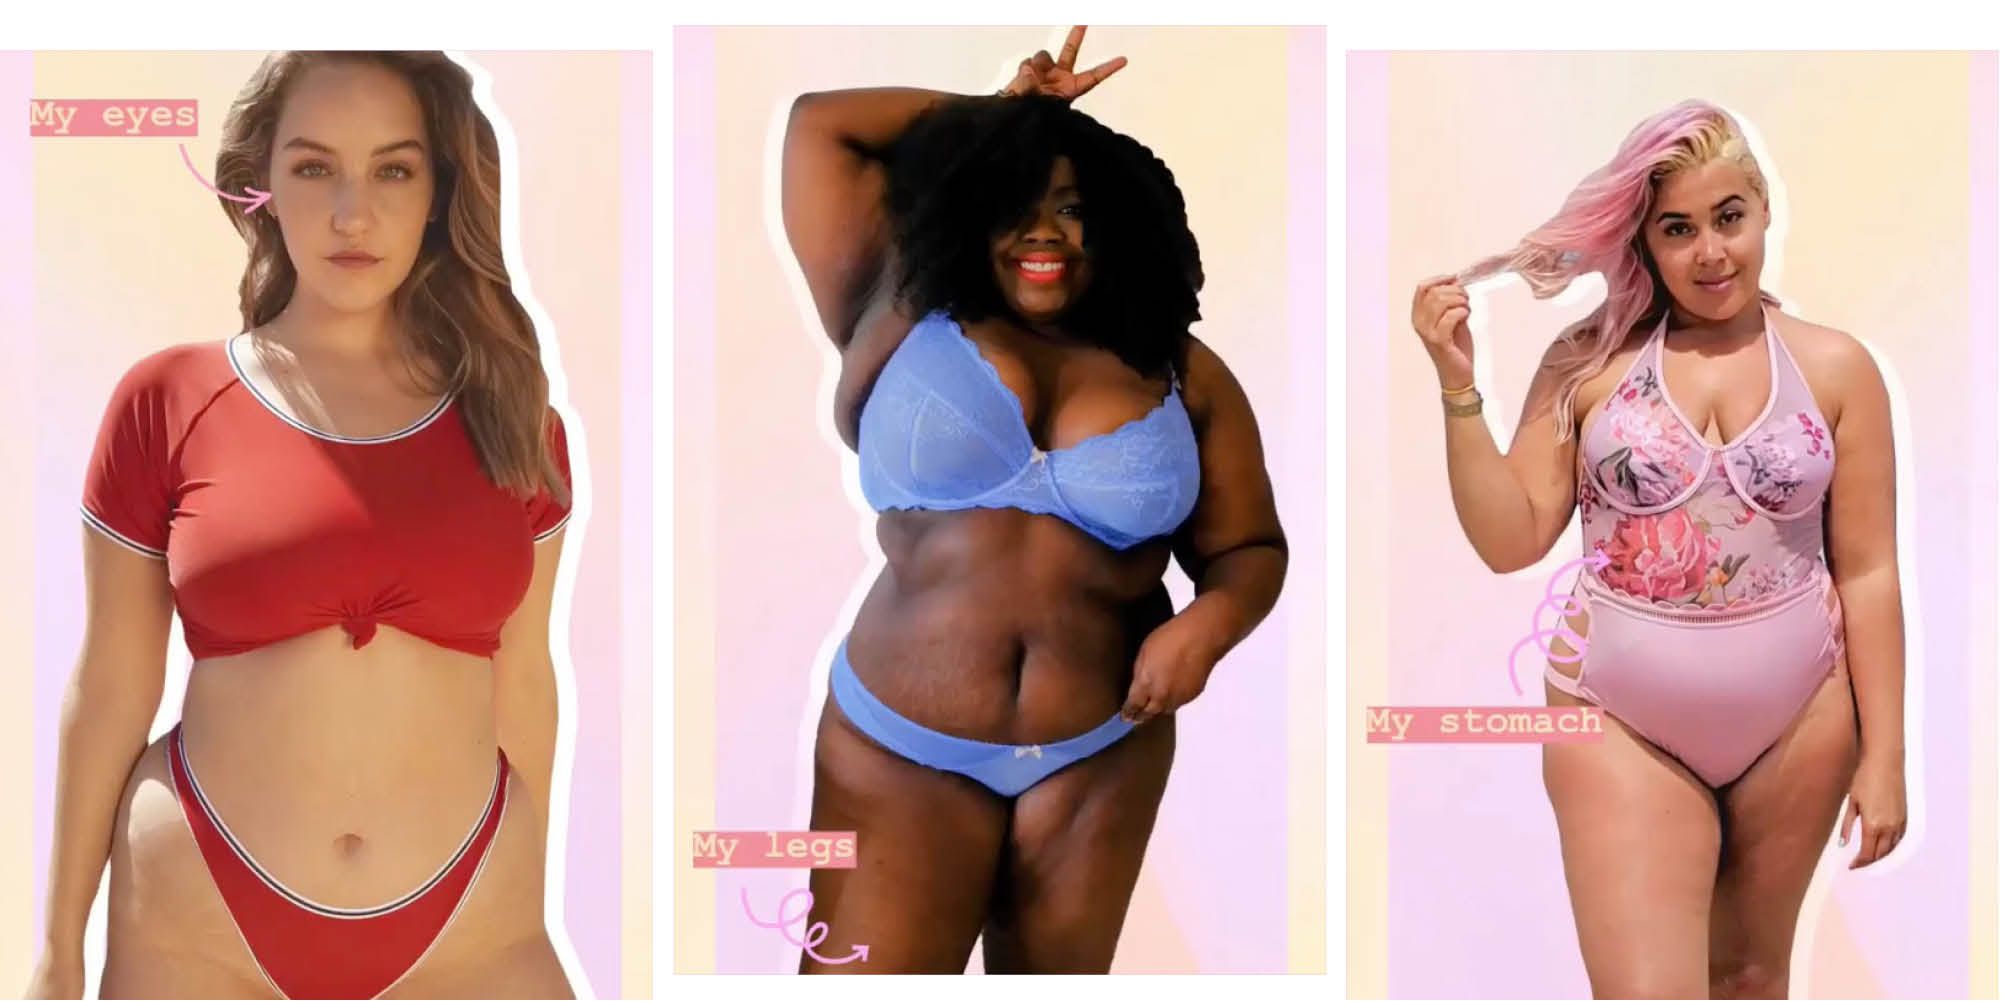 11 women on what their bodies mean to them